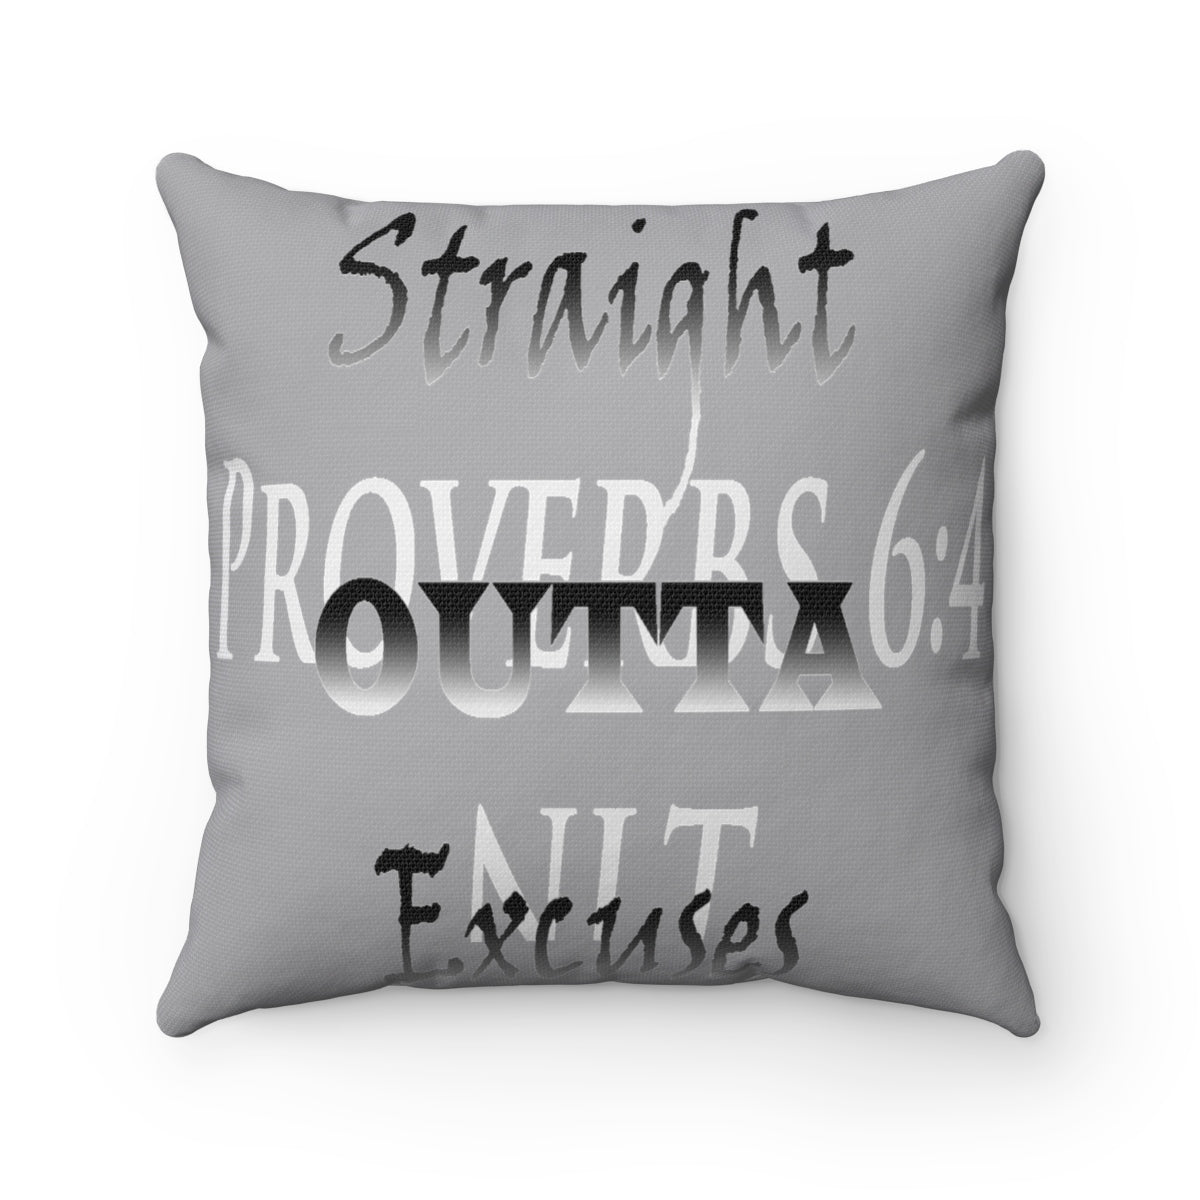 Straight Outta Excuses Spun Polyester Square Pillow - Obsidian's LLC